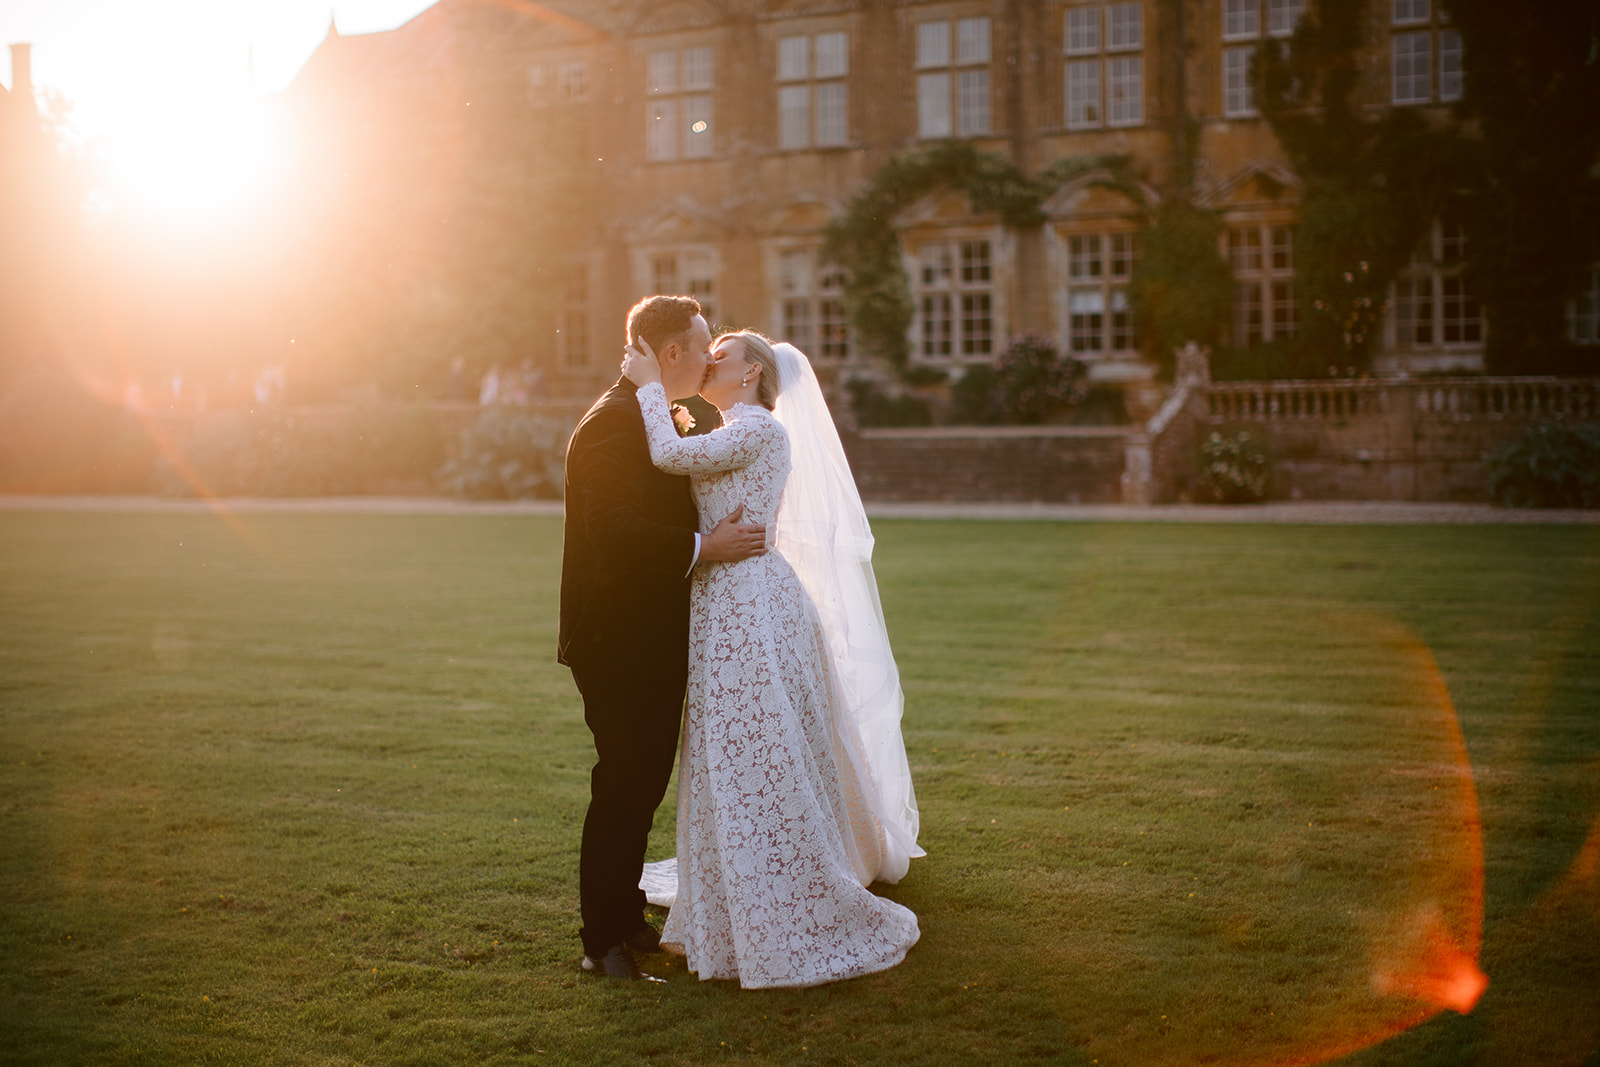 sun flare coming into the photo as the bride and groom kiss at their brympton house wedding